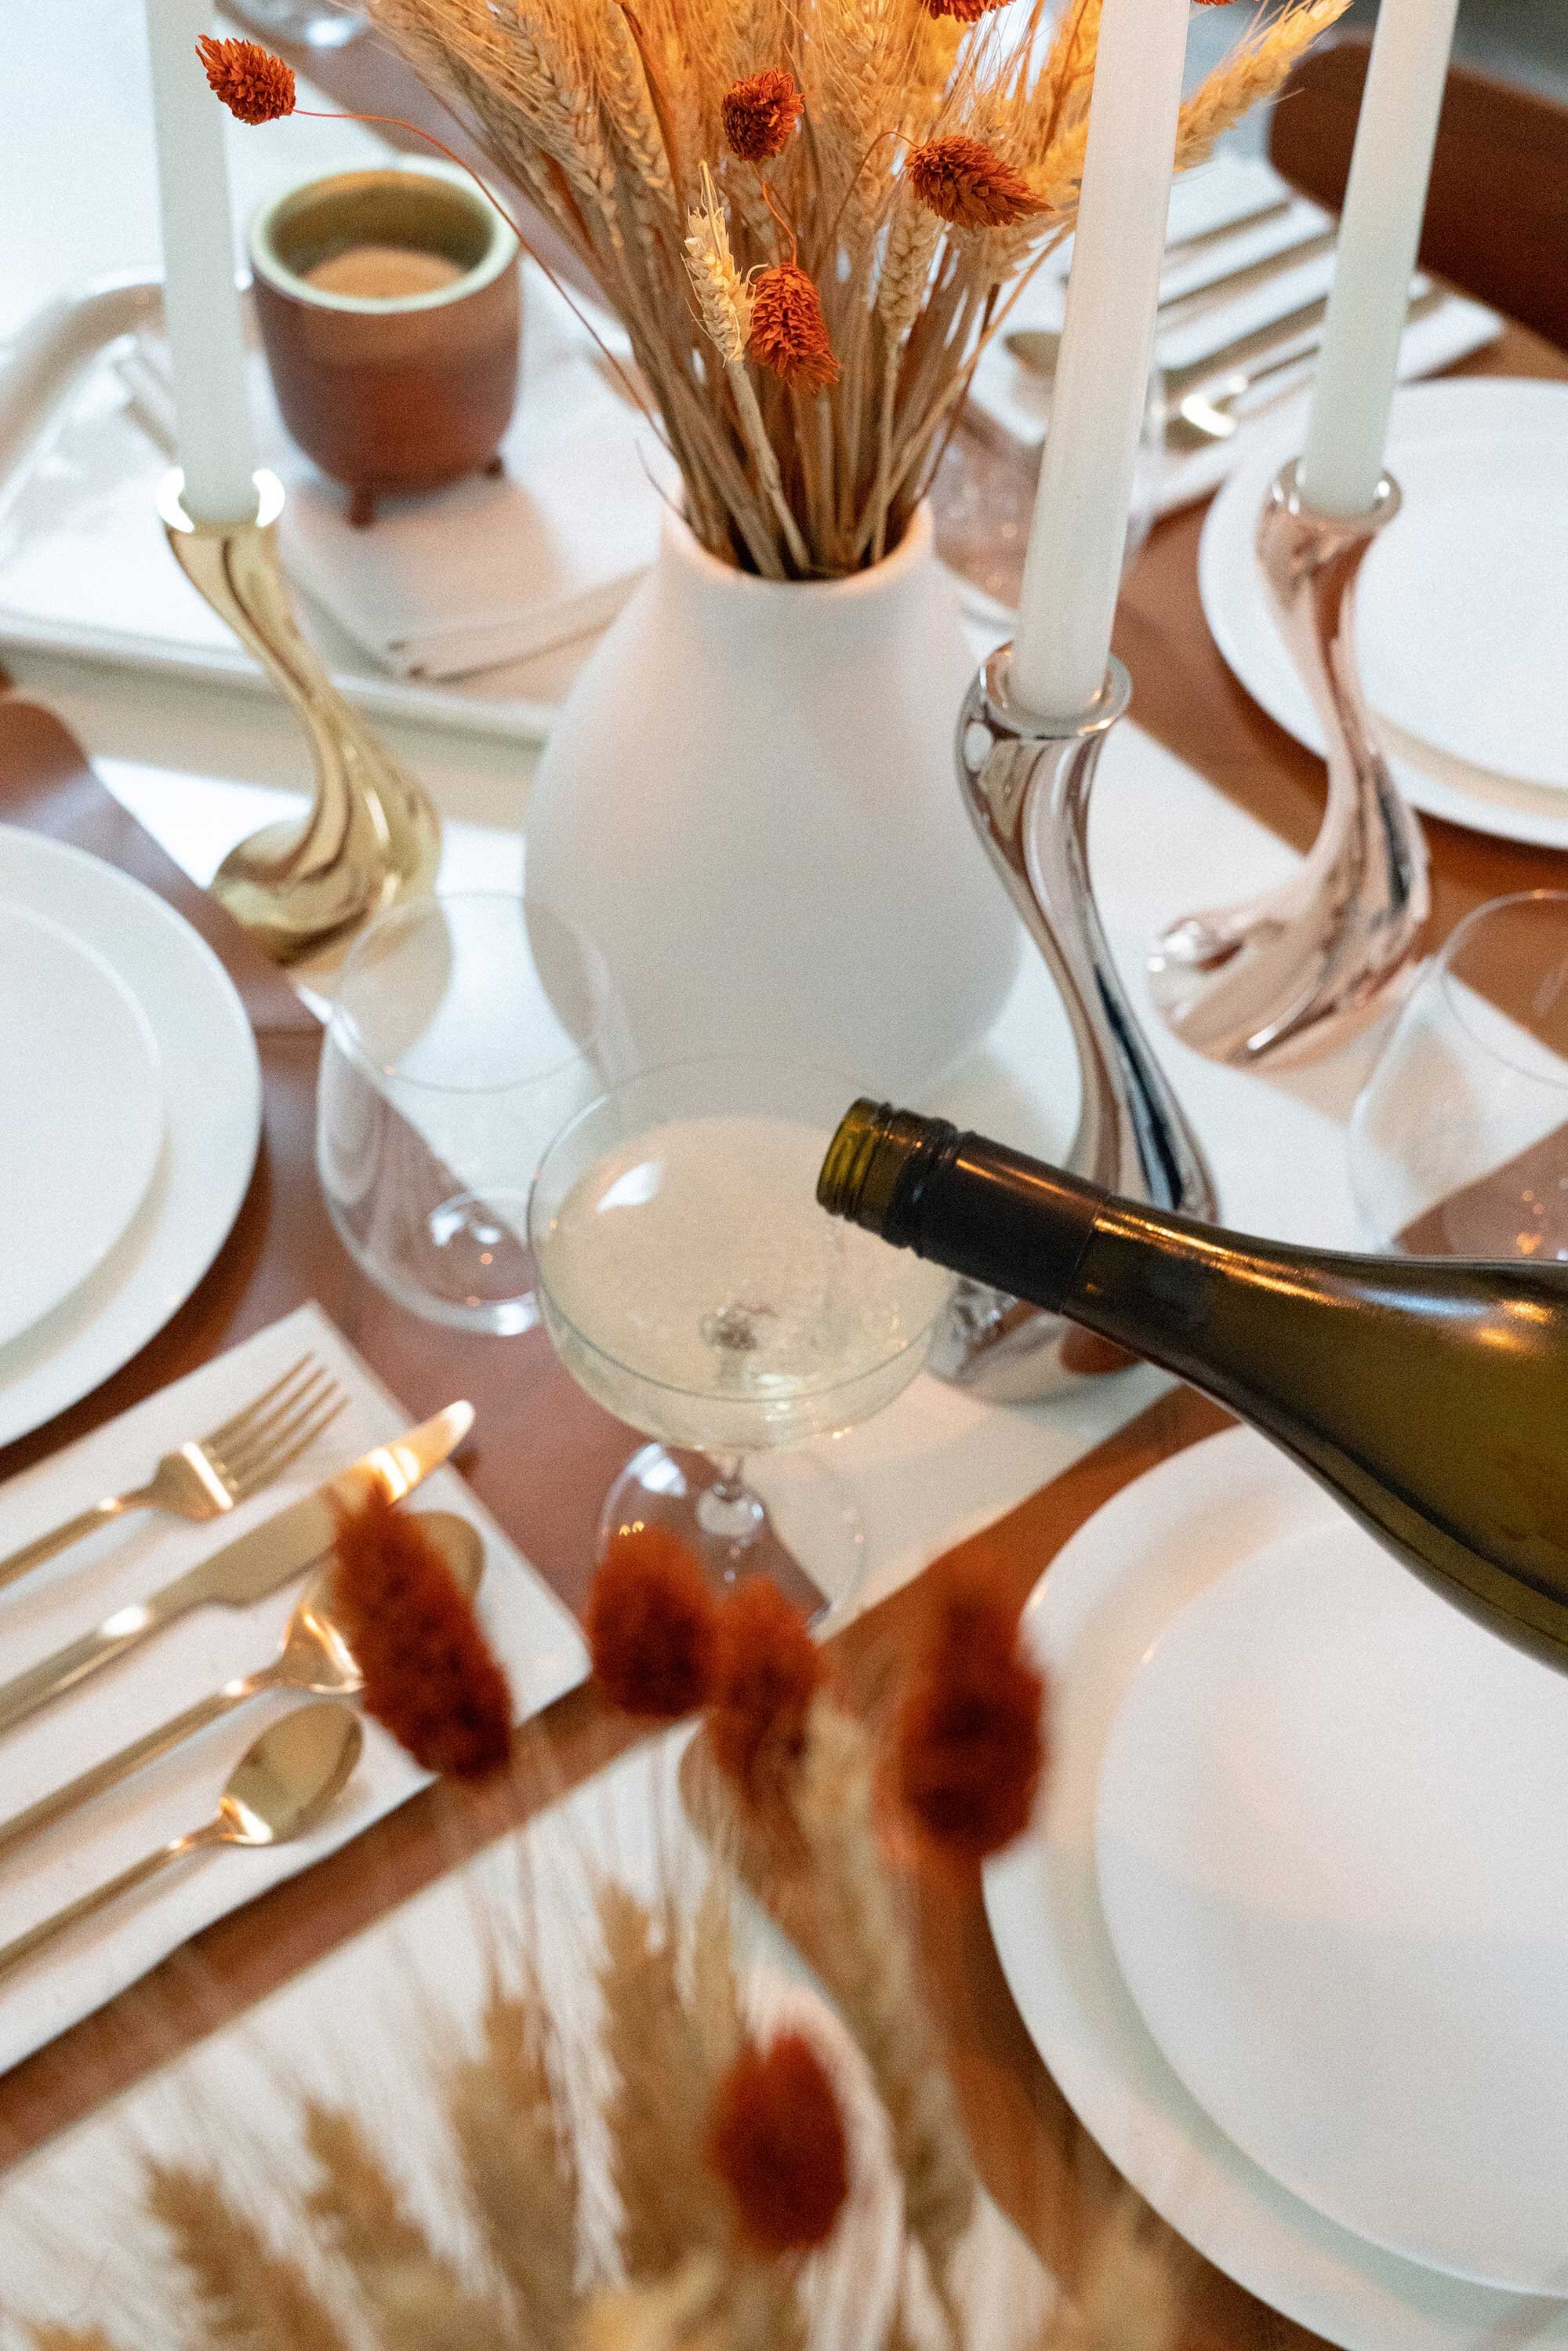 Thanksgiving table settings elegant gold. Sarah Butler of @sarahchristine Thanksgiving table settings featuring Georg Jensen Cobra Candleholder Set, tan leather placemats, and modern gold plated flatware with rustic dried flowers 18.jpg